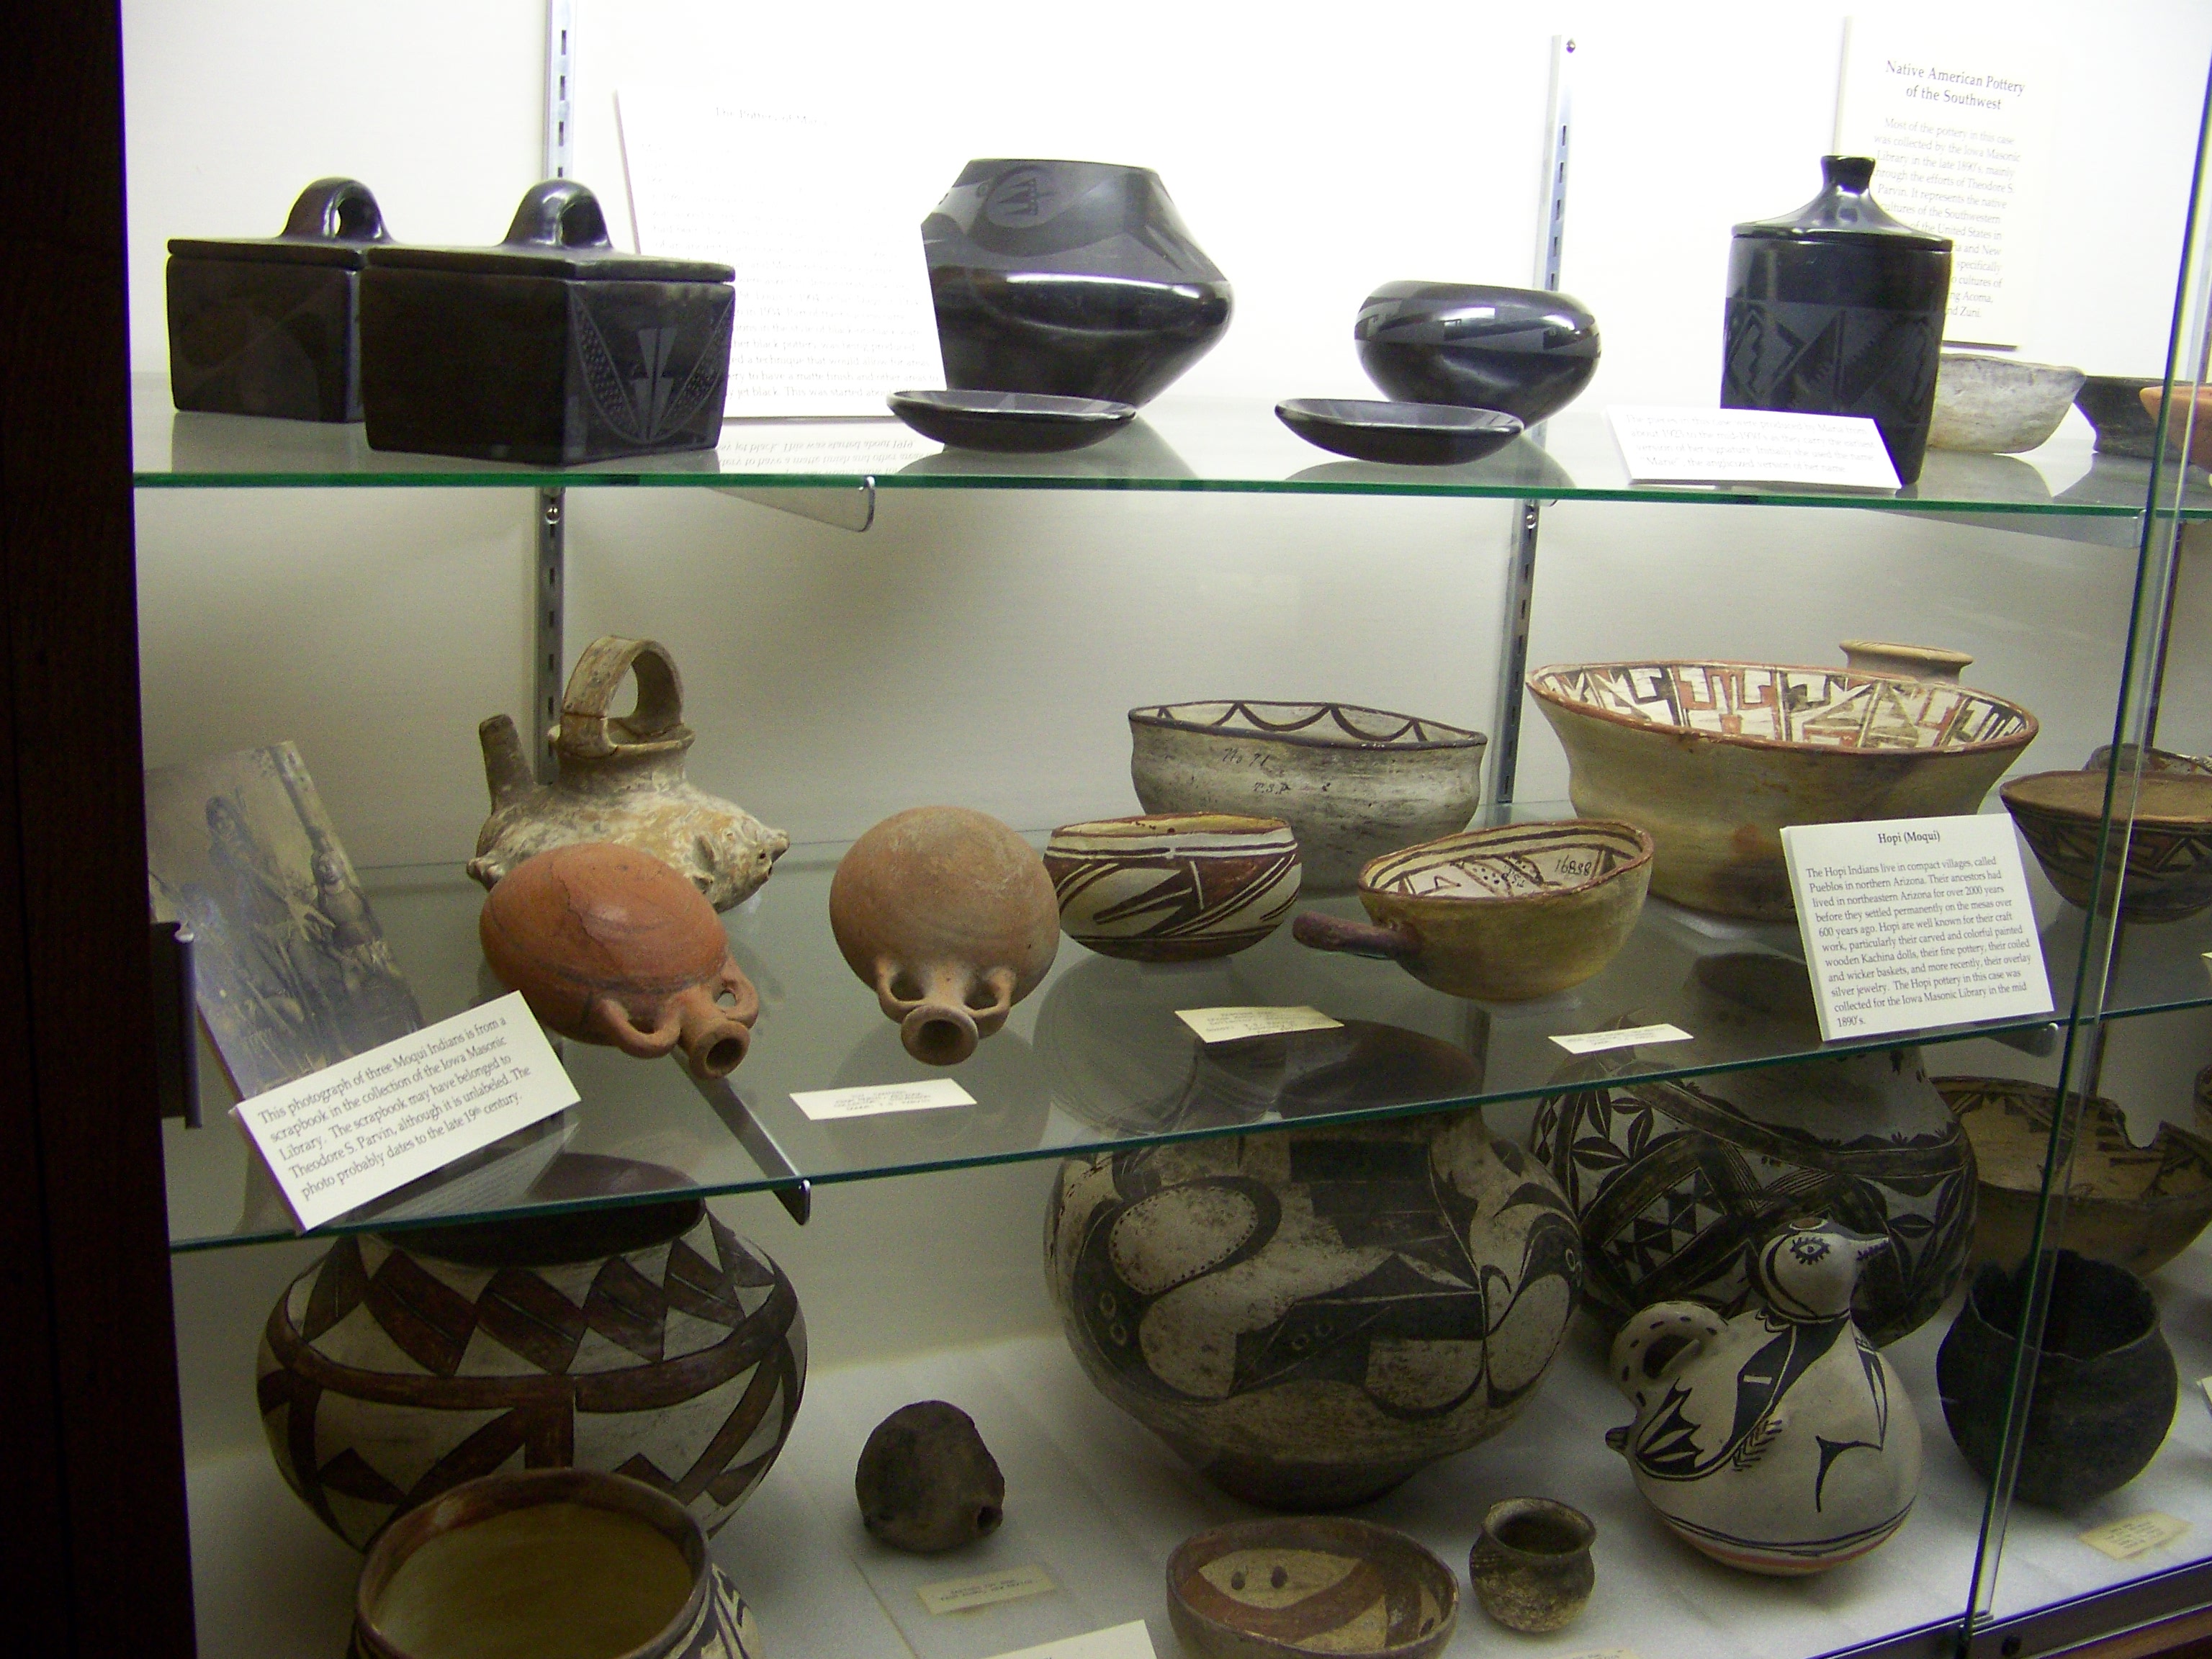 The pottery in this exhibit  specifically represents the Pueblo cultures of this region, including Acoma, Hopi (Moqui), and Zuni.